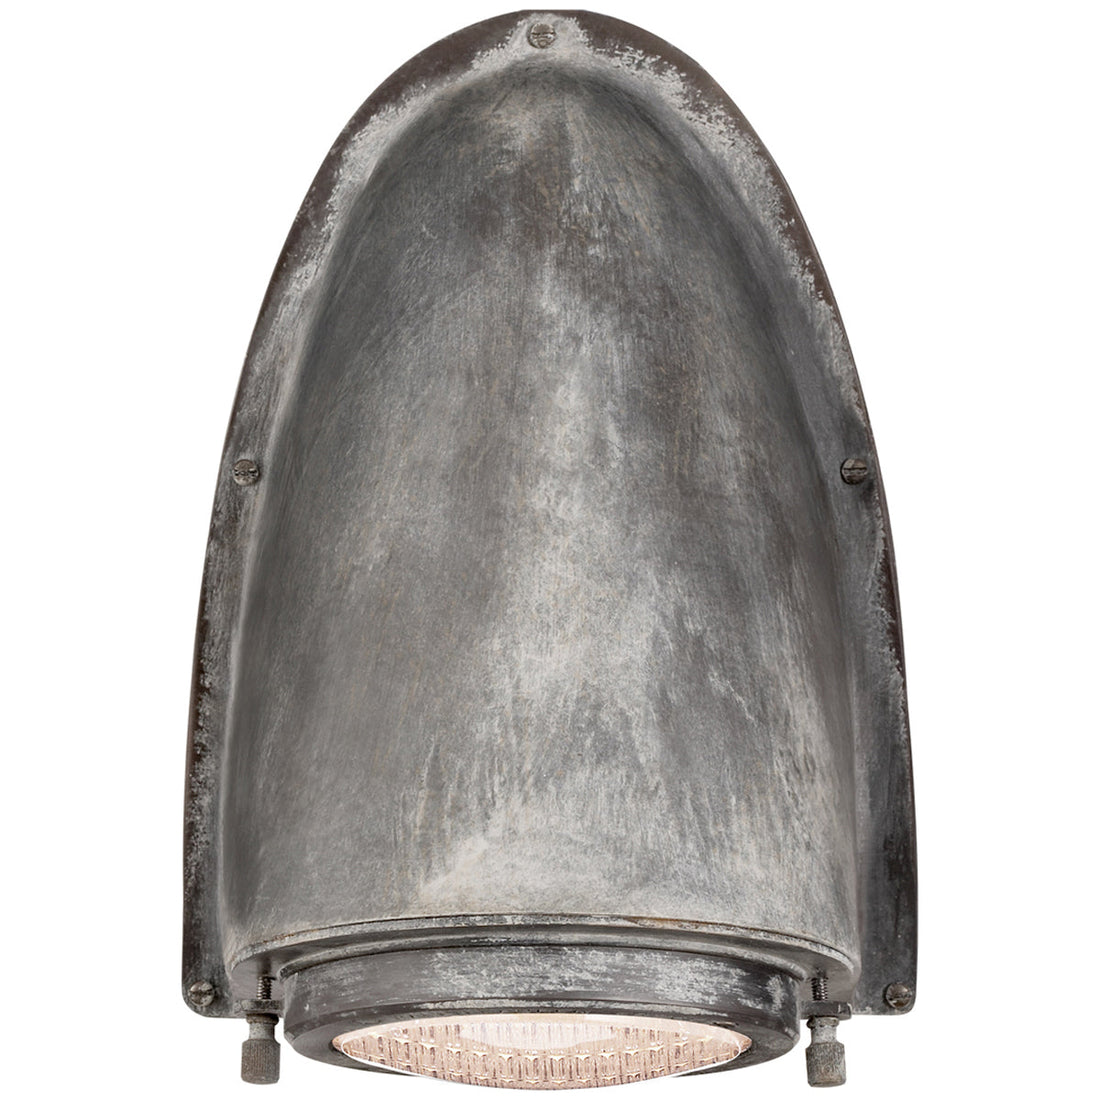 Visual Comfort Grant Large Sconce